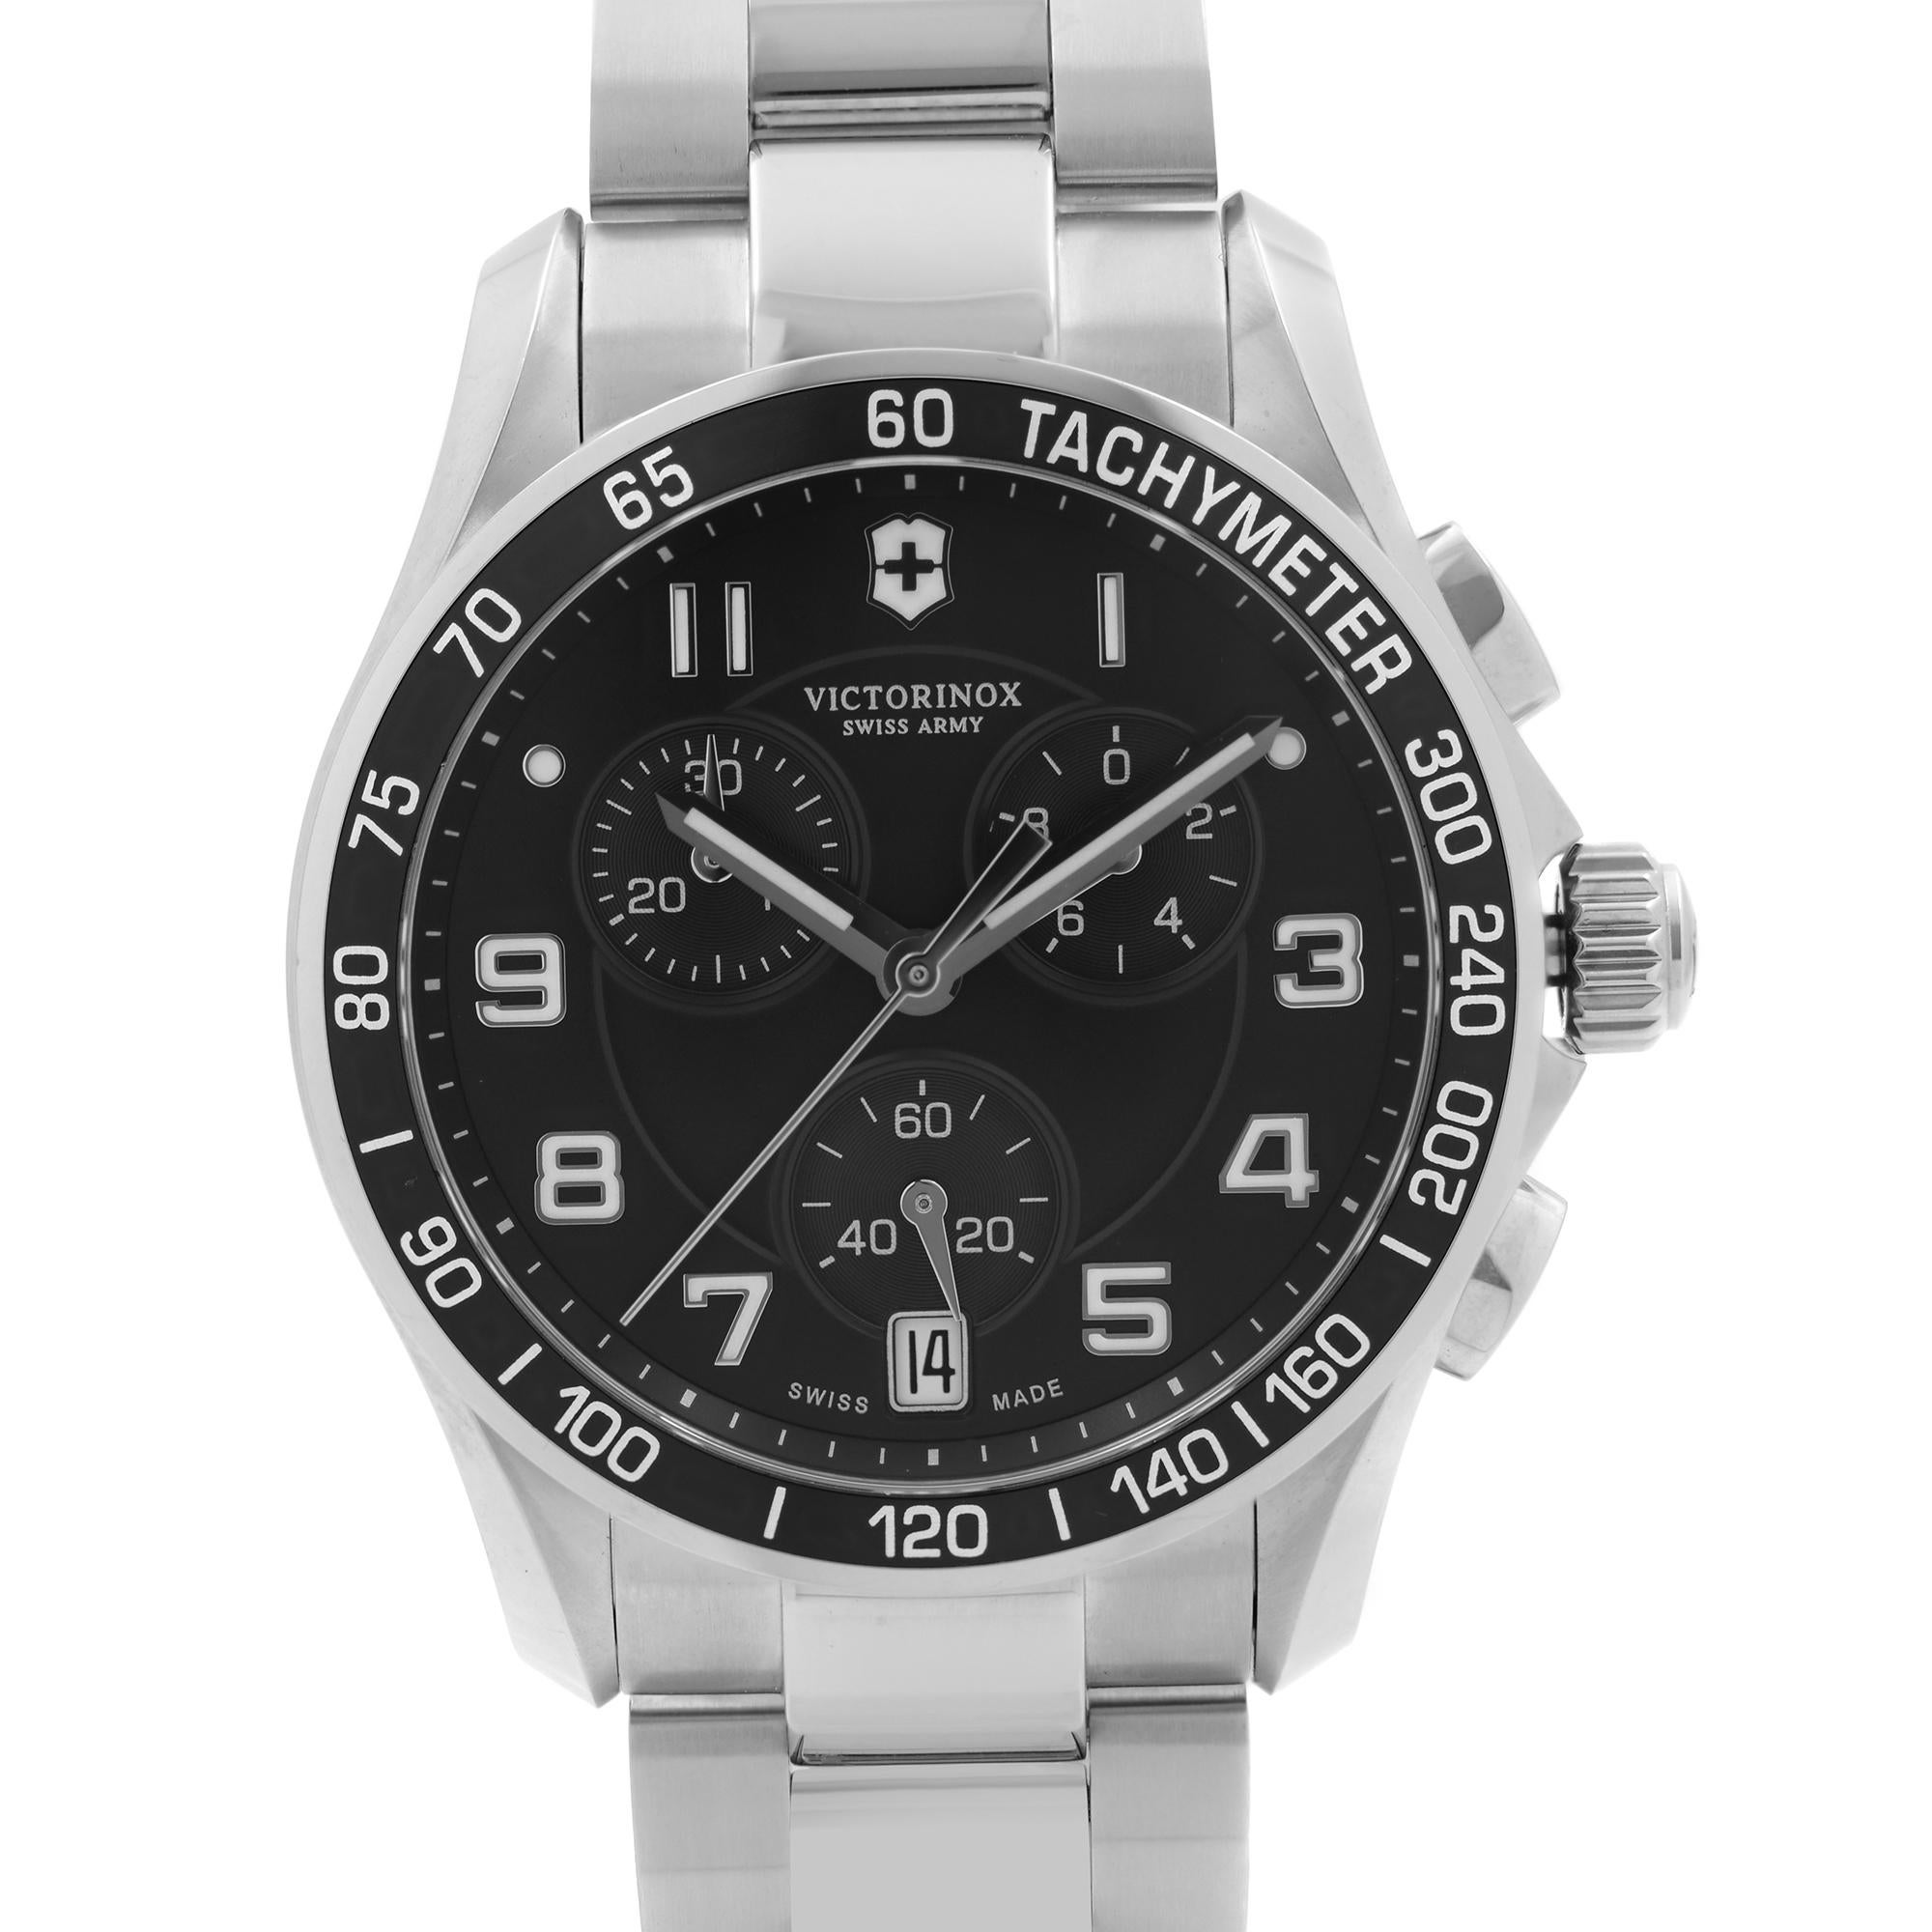 New with Defects Victorinox Swiss Army Quartz Watch 241494. The Watch has a Little Dent on the Bezel Insert. This Beautiful Timepiece Features: A brushed Stainless Steel Case and Steel Bracelet. Fixed Stainless Steel with a Black Aluminum Top Ring